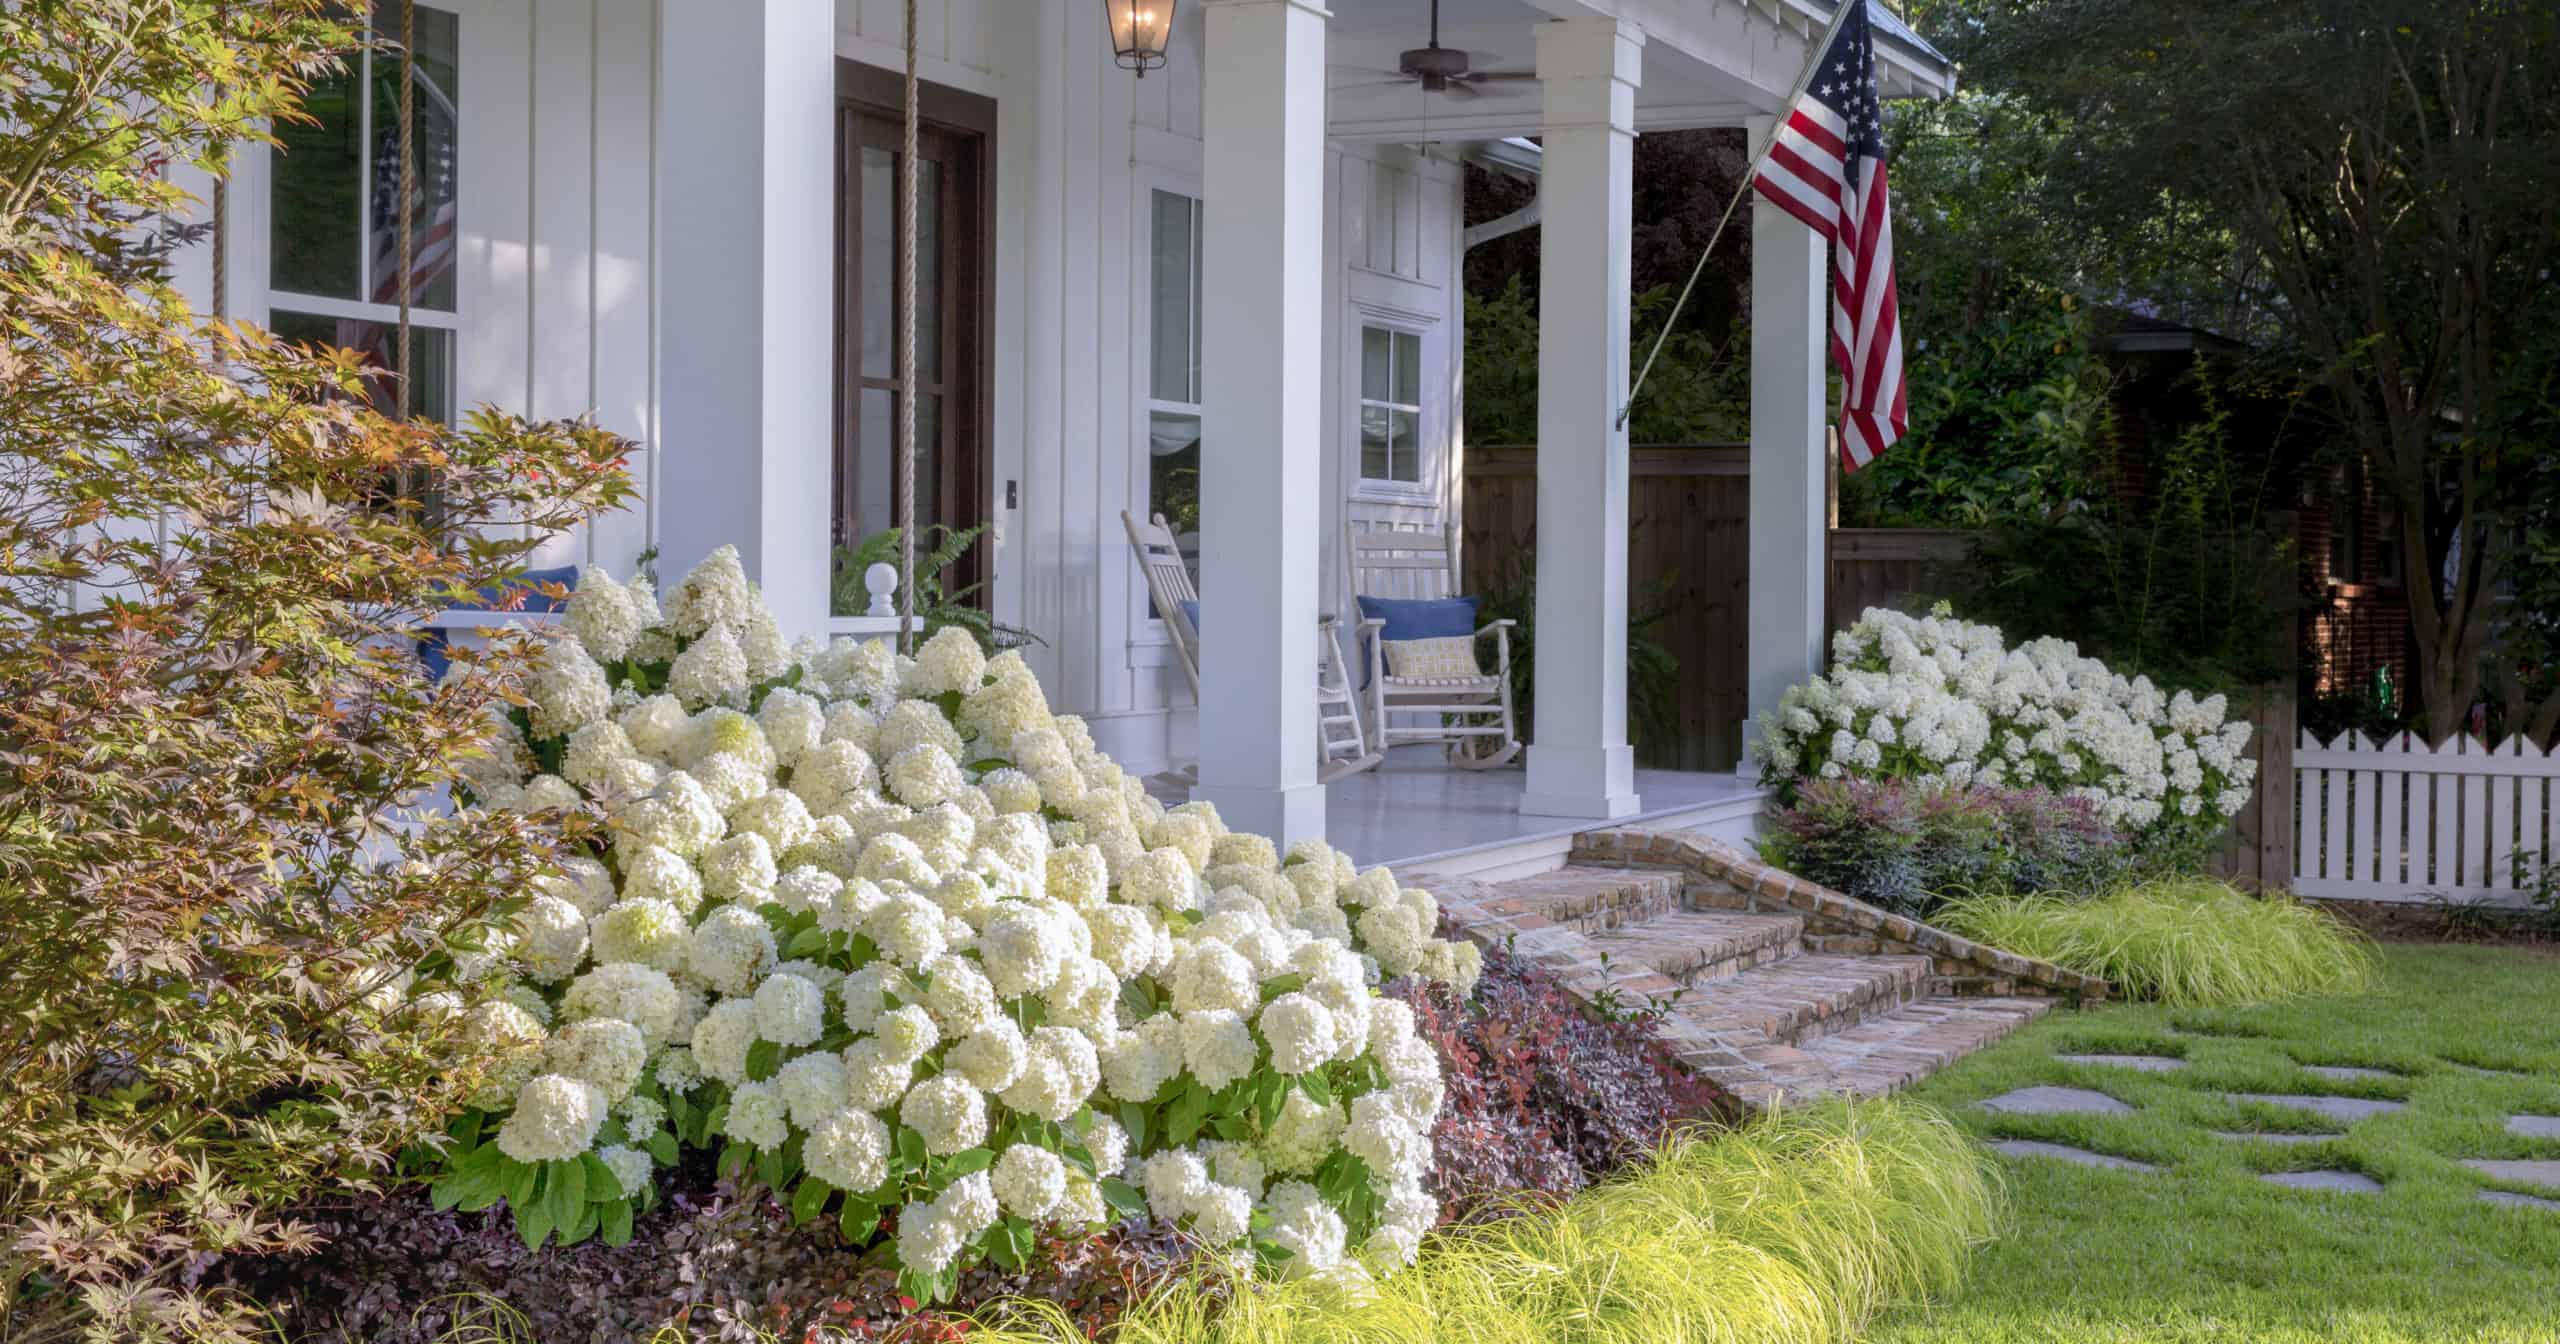 Are You Looking For A New Garden Romance, Pictures Of Hydrangeas In Landscaping